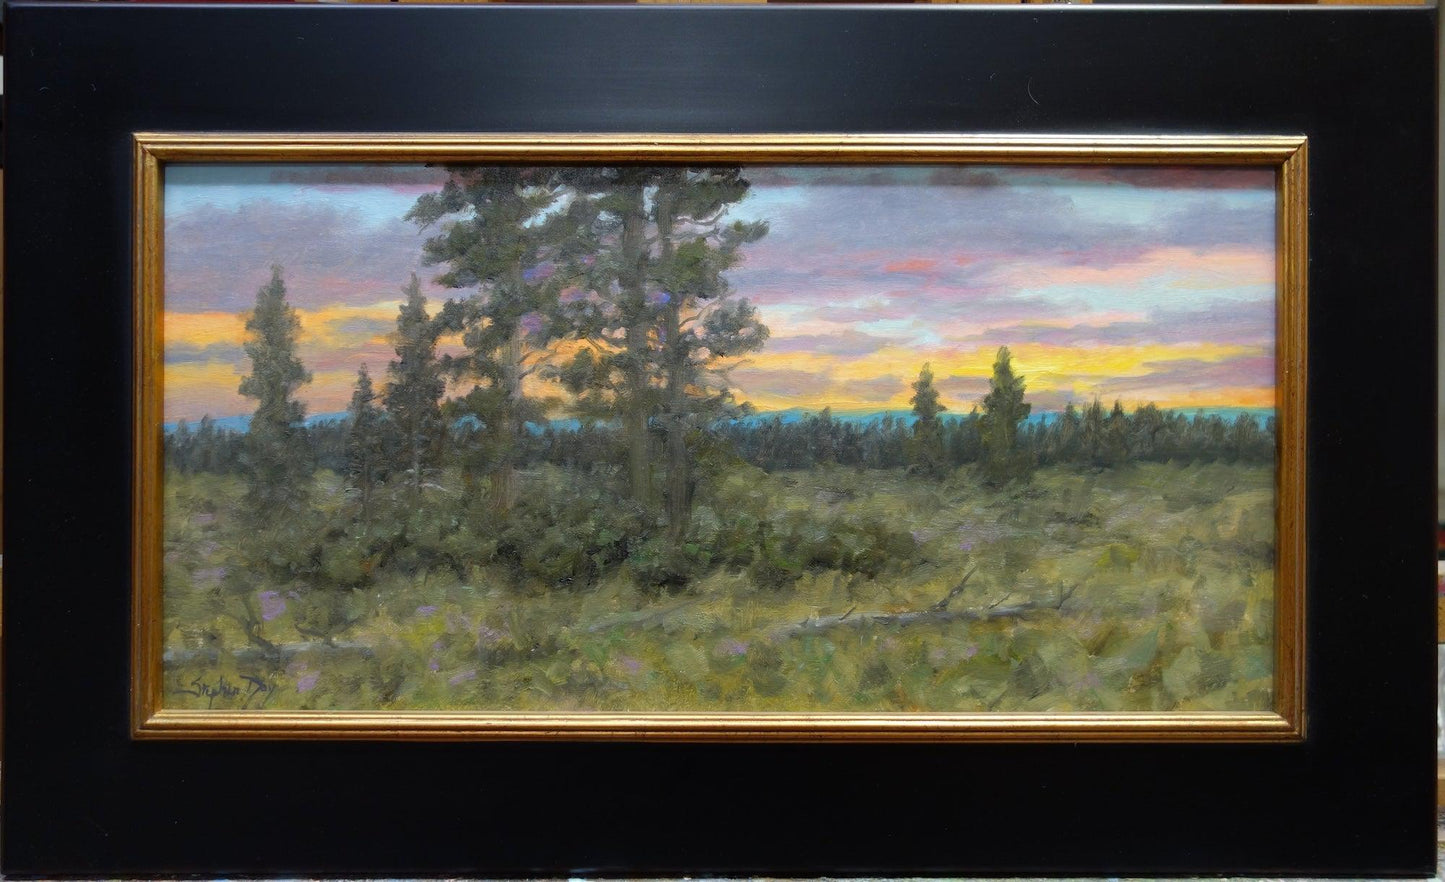 High Pass Sunrise-Painting-Stephen Day-Sorrel Sky Gallery